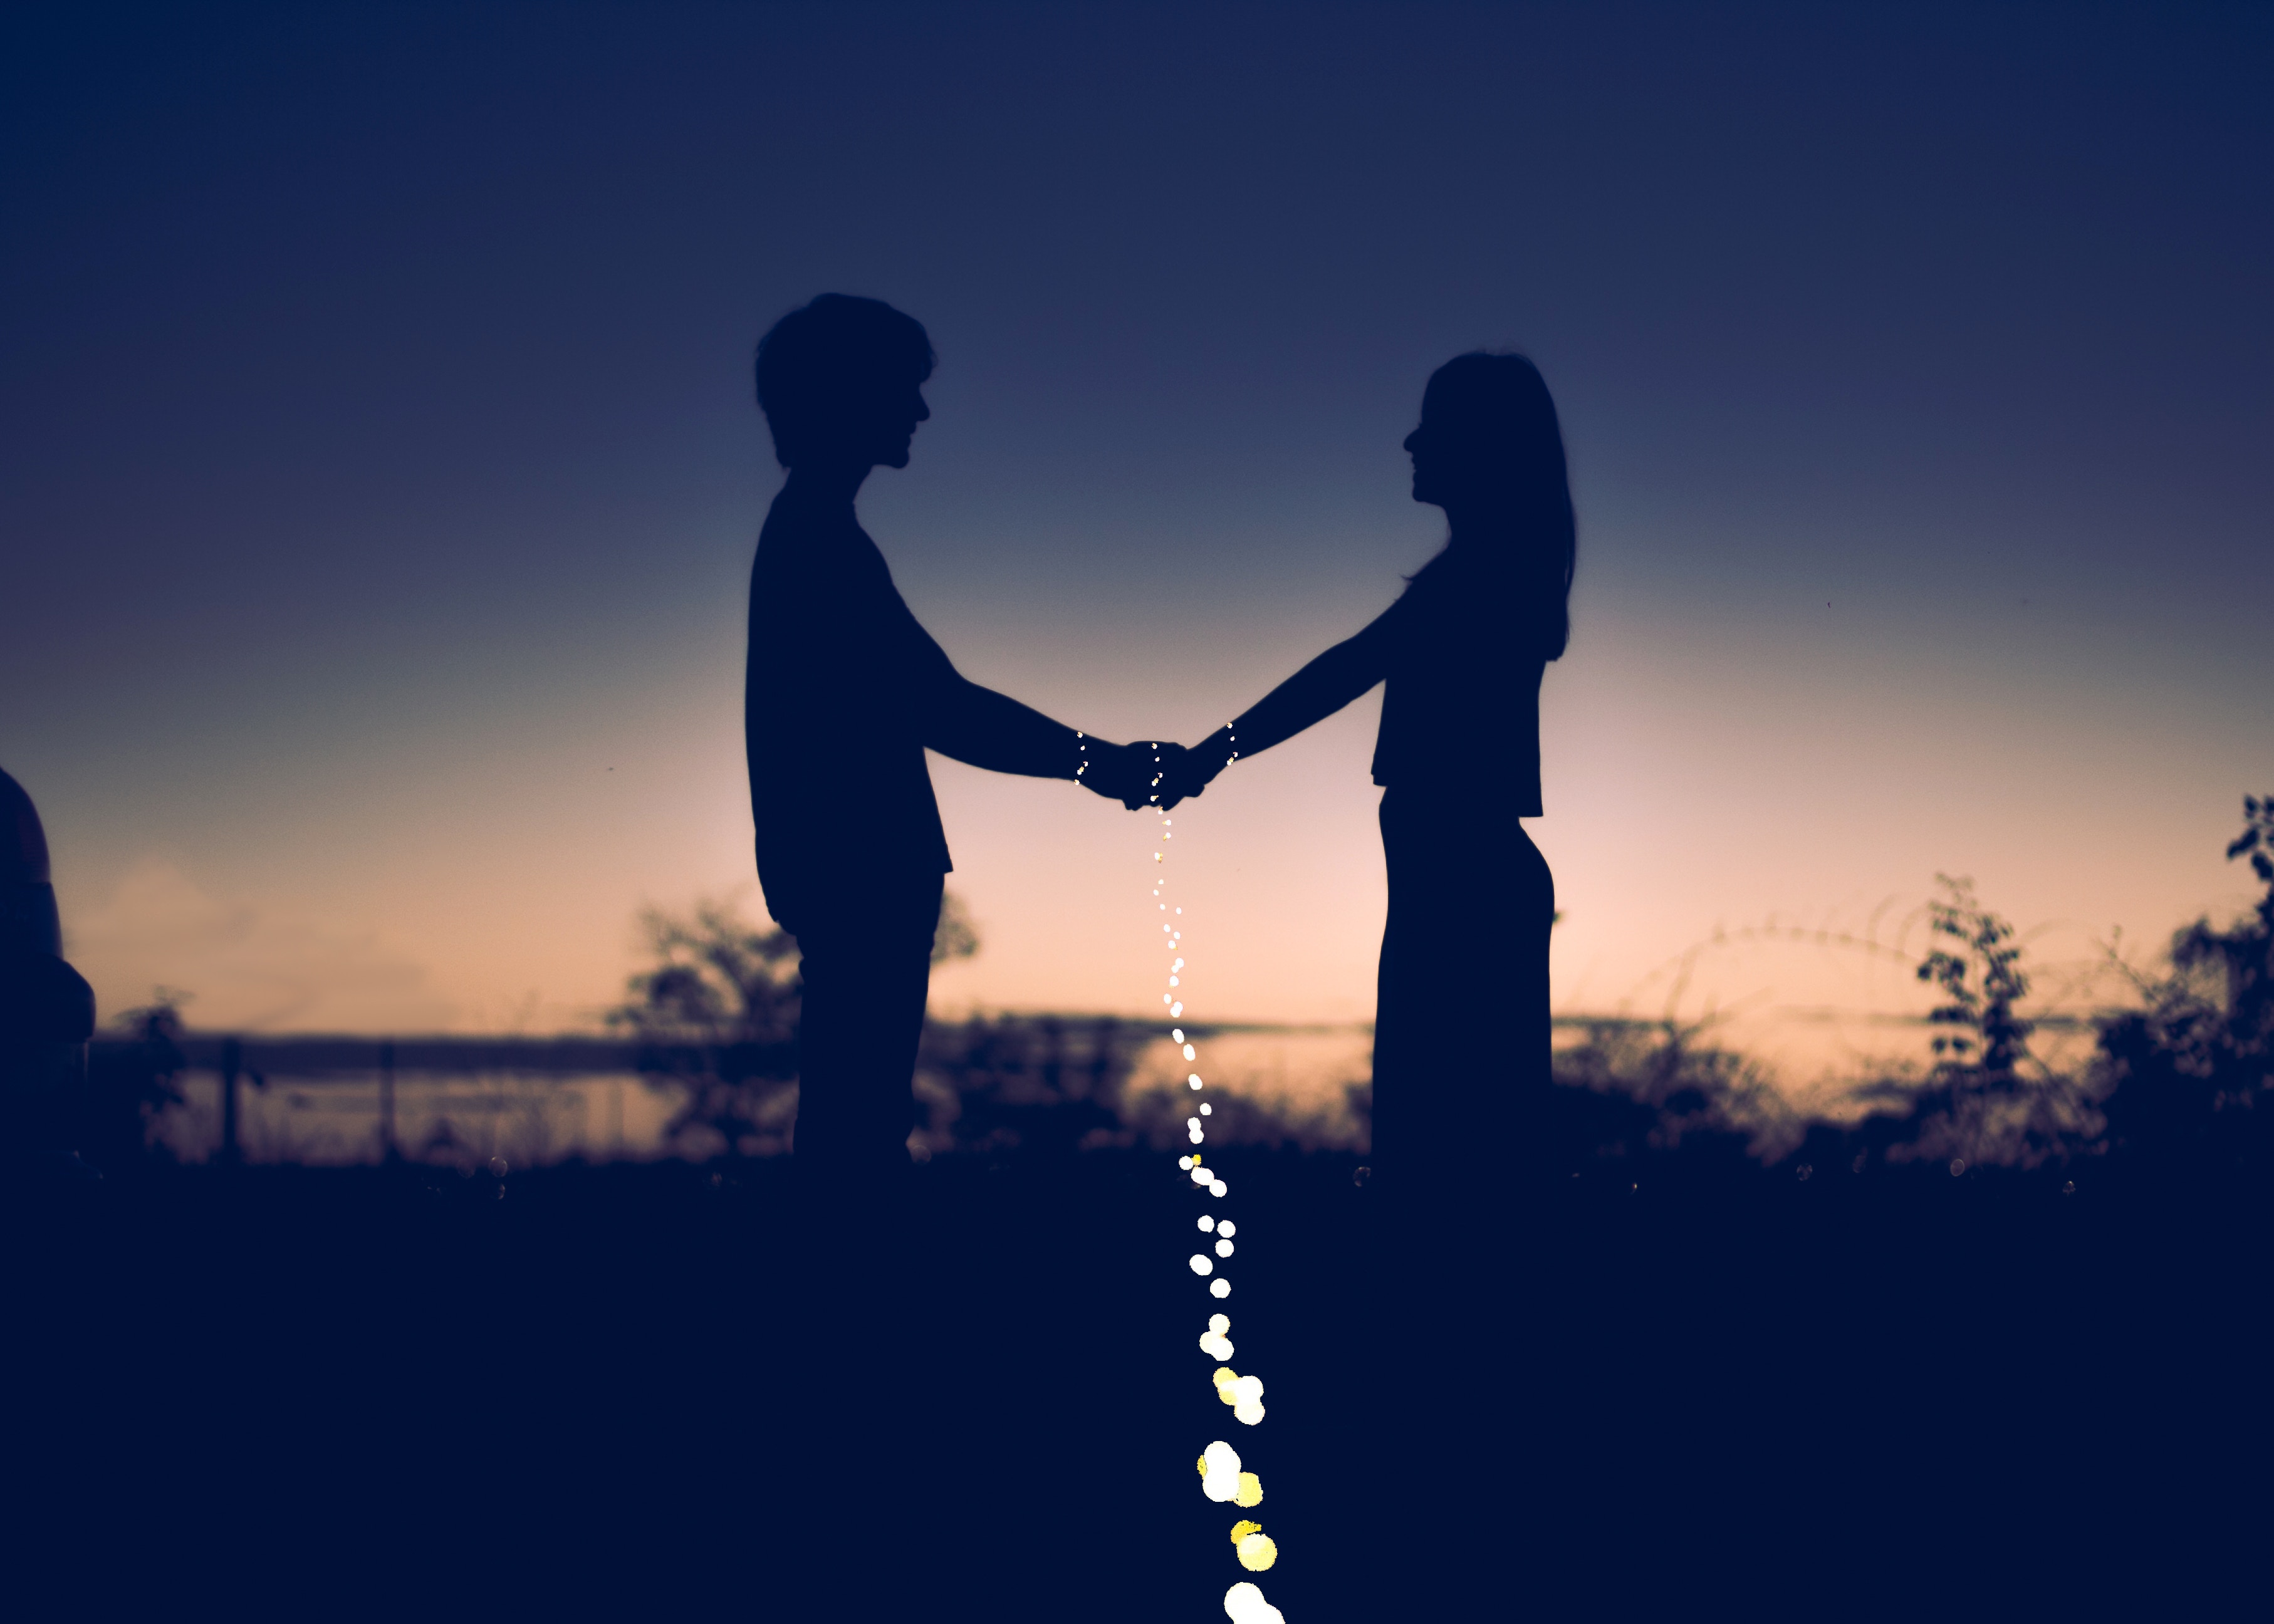 83324 download wallpaper couple, love, pair, silhouettes, happiness screensavers and pictures for free